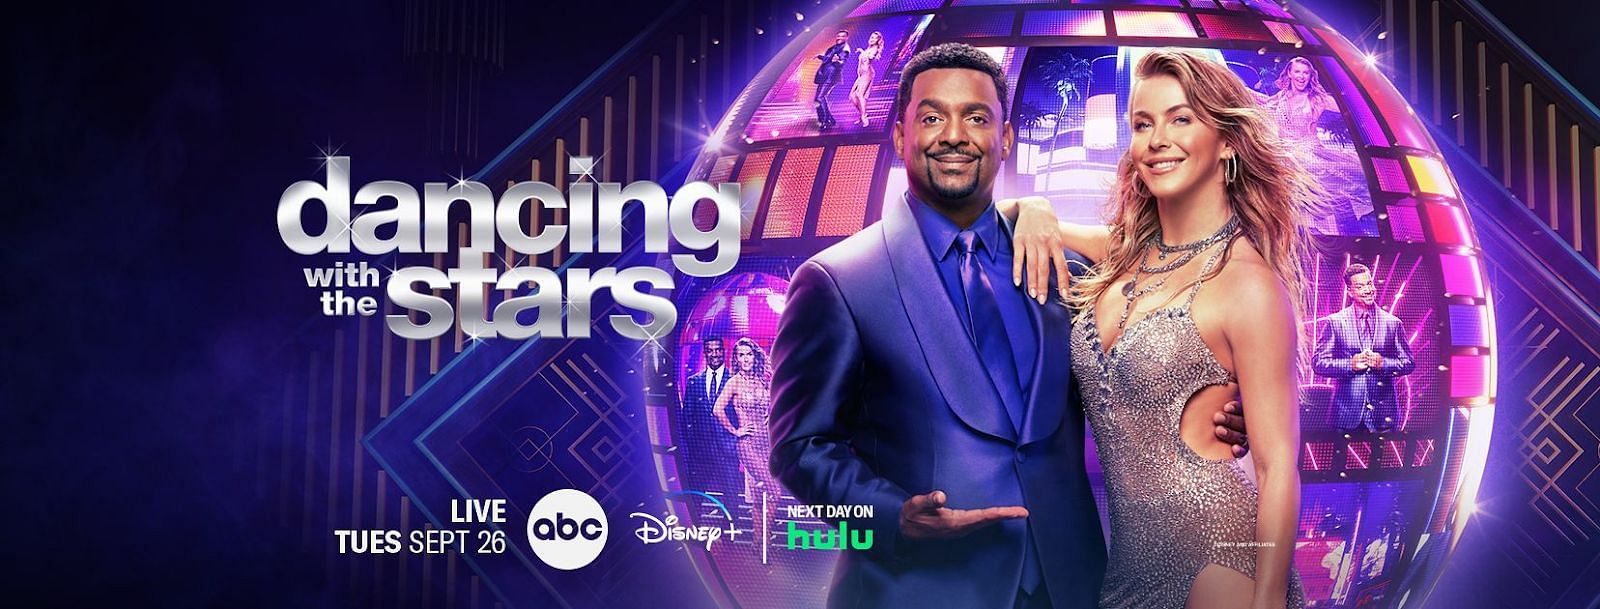 Who hosts Dancing with the Stars?